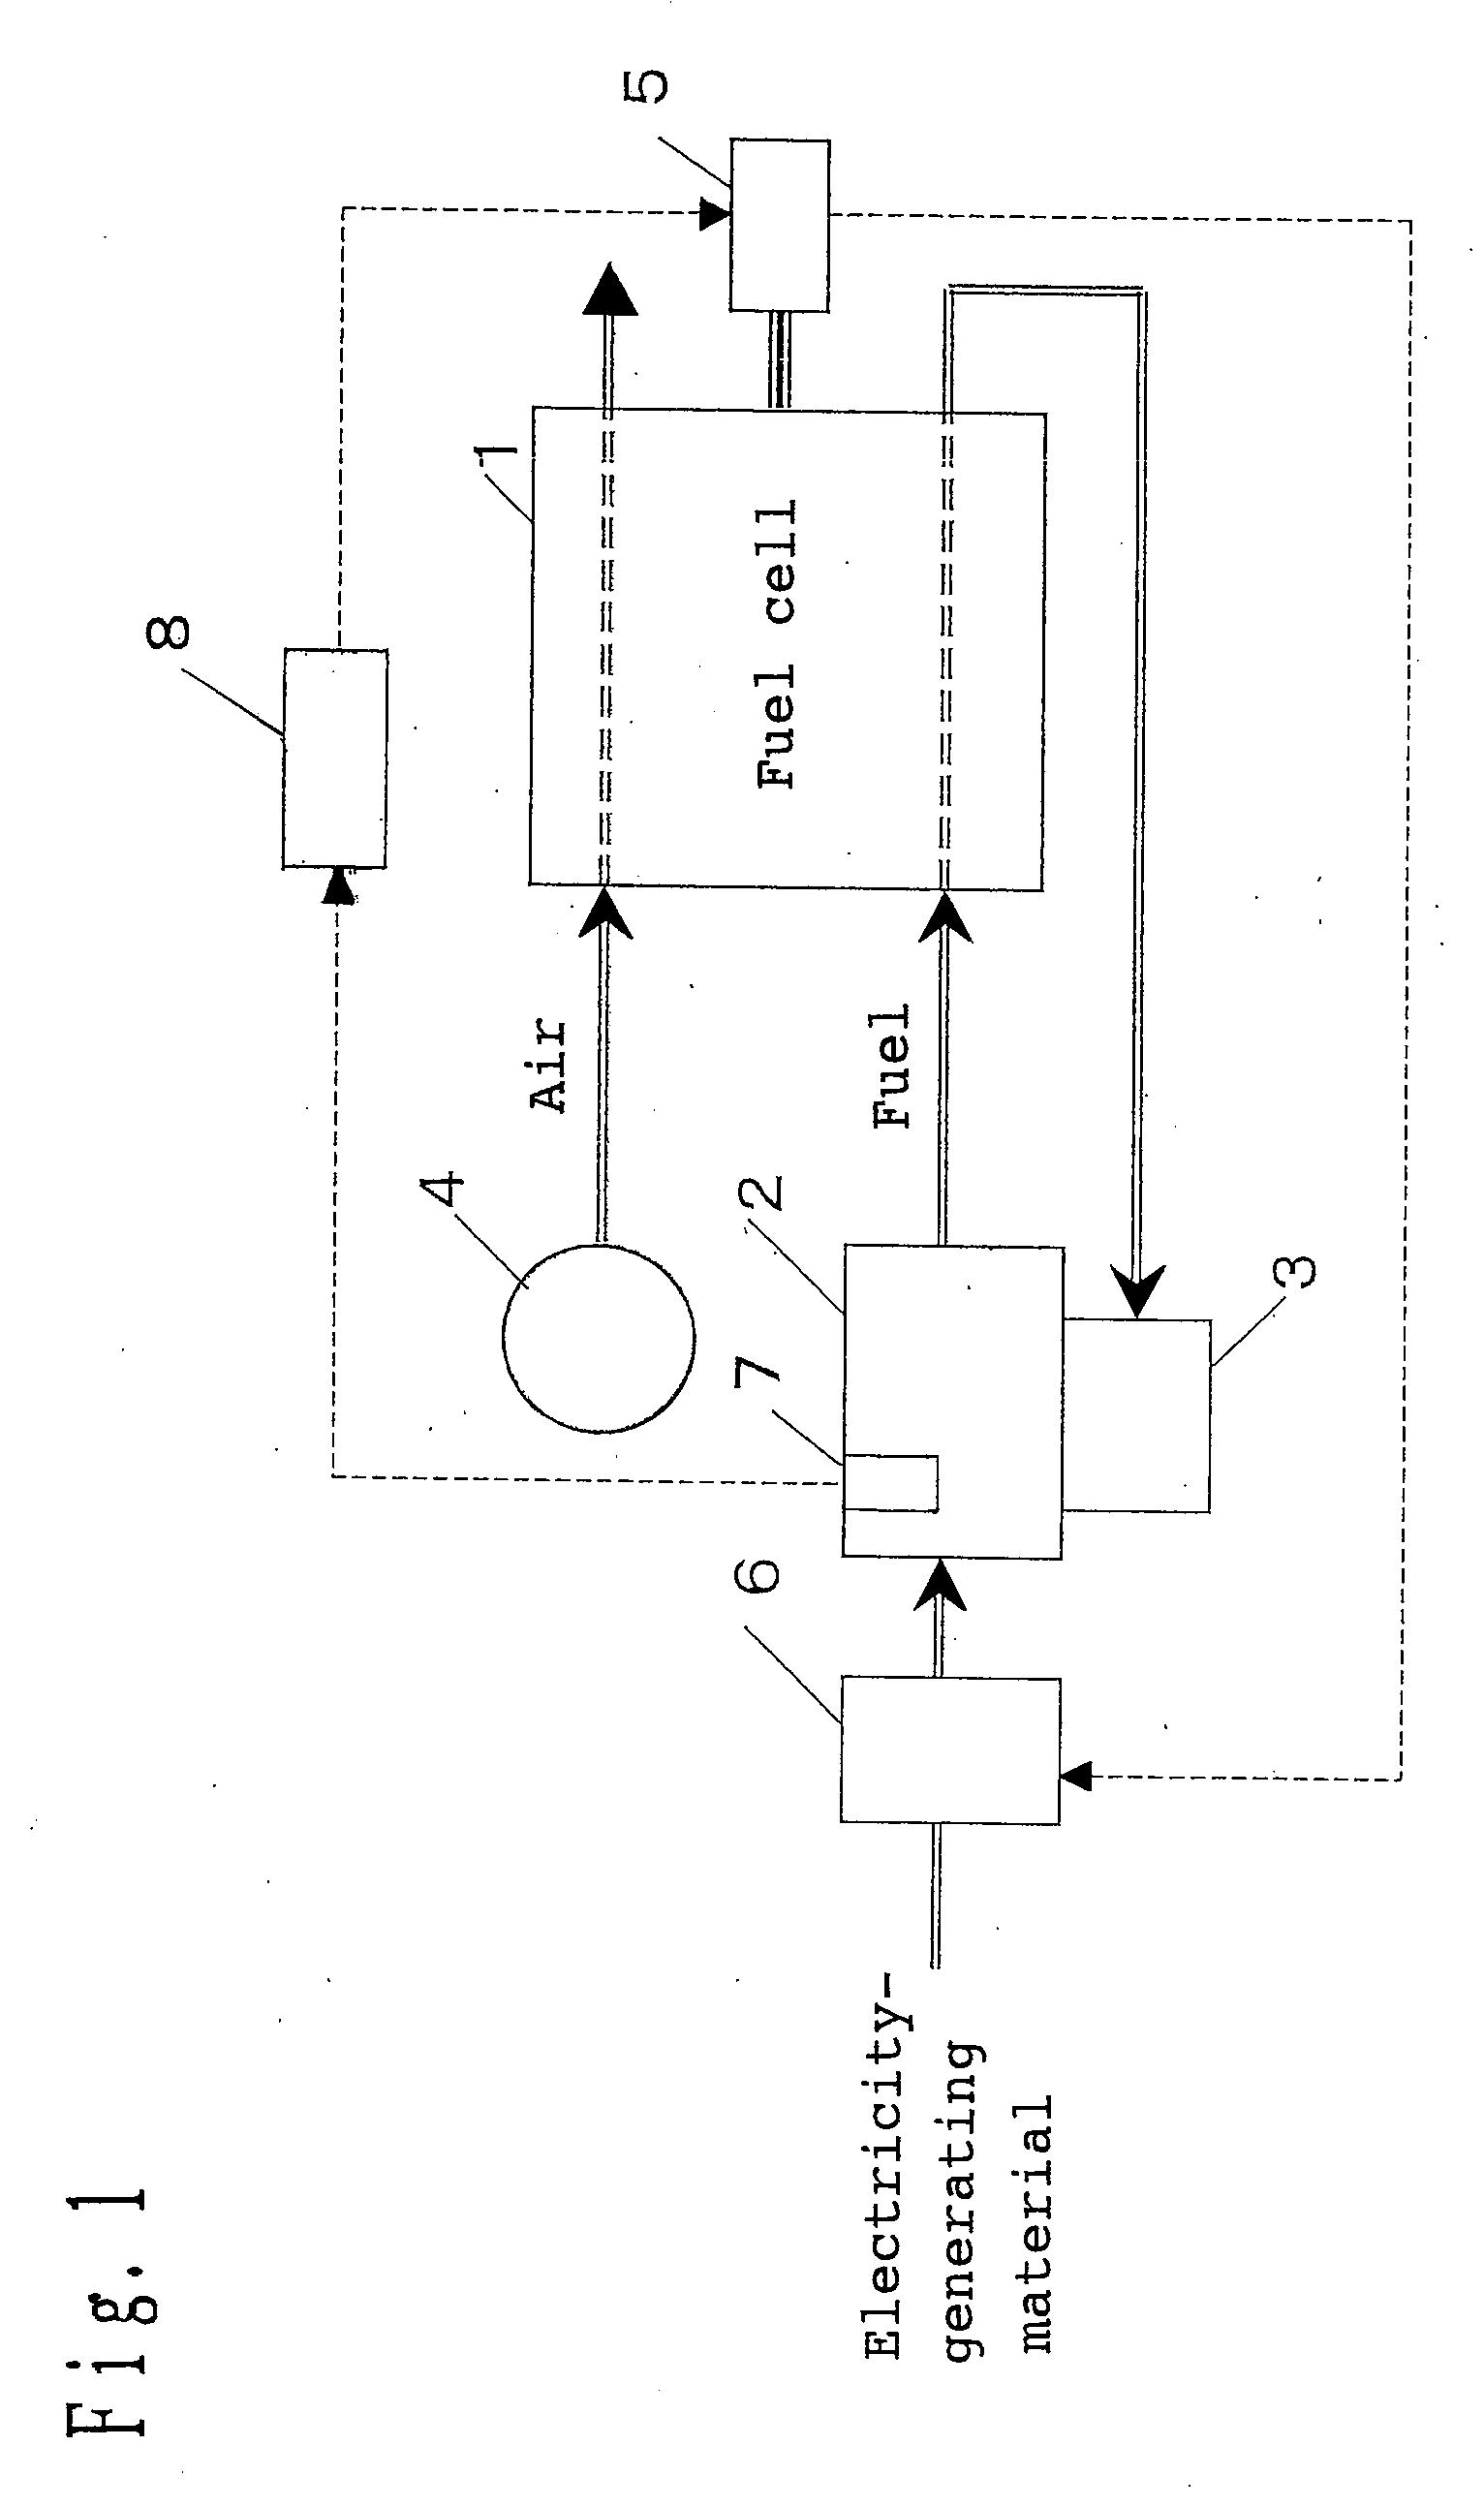 Fuel cell electricity-generating device